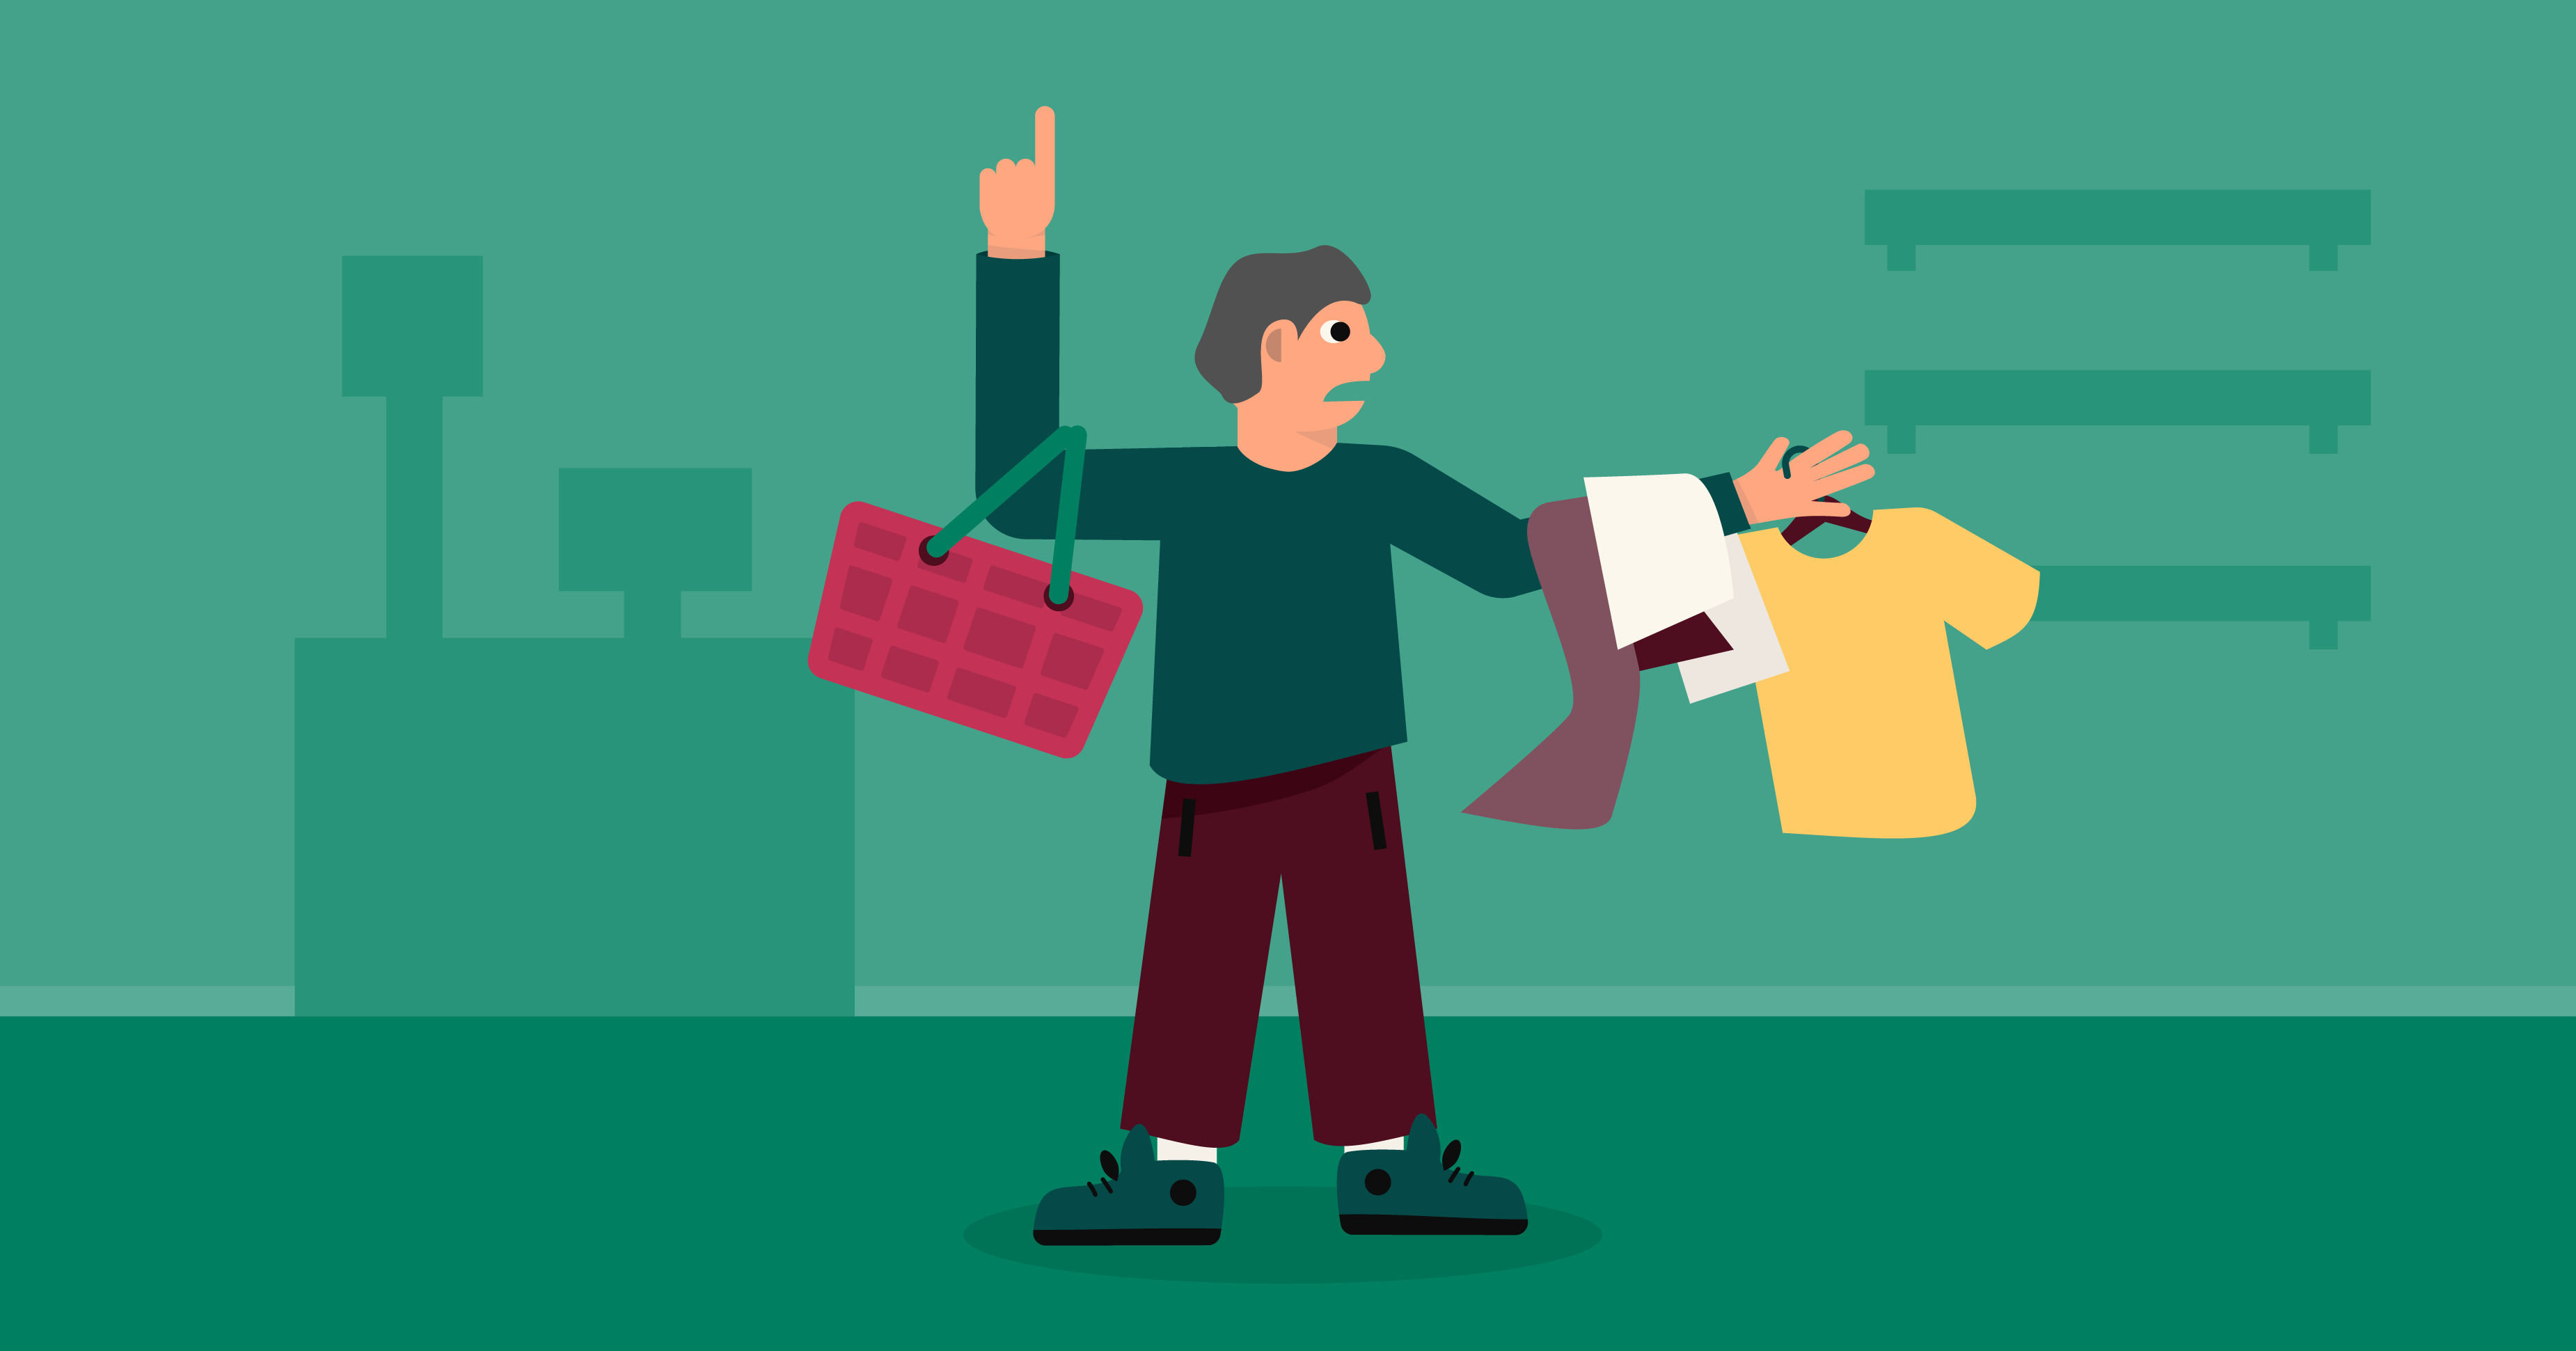 Illustration of a disgruntled shopper with arms full of clothing looking for a sales associate